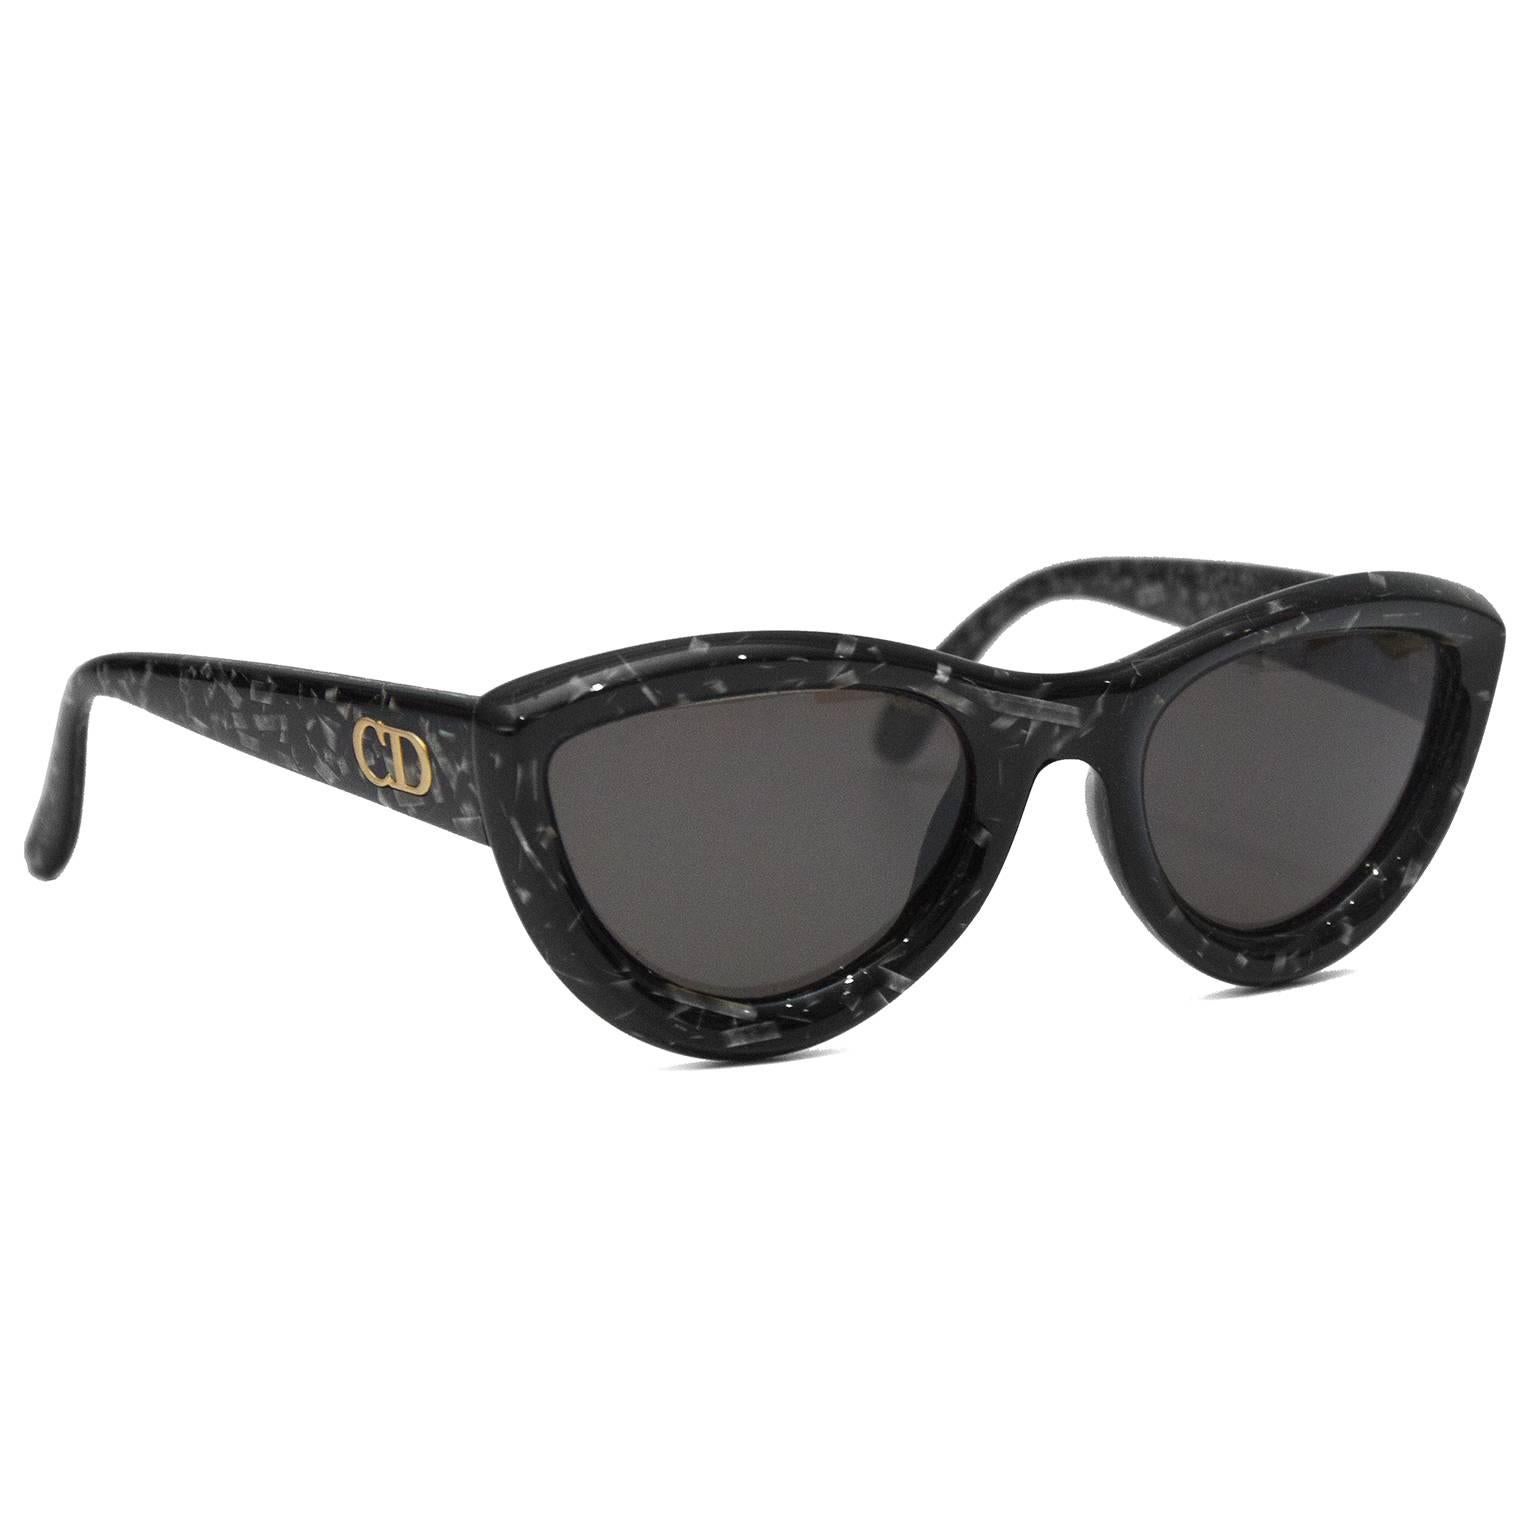 Chunky black acetate marble effect Dior sunglasses. Dating from the 1990's in their original case, these cats eye shaped glasses are in excellent condition with dark grey black lenses and gold CD logo on the arm. 